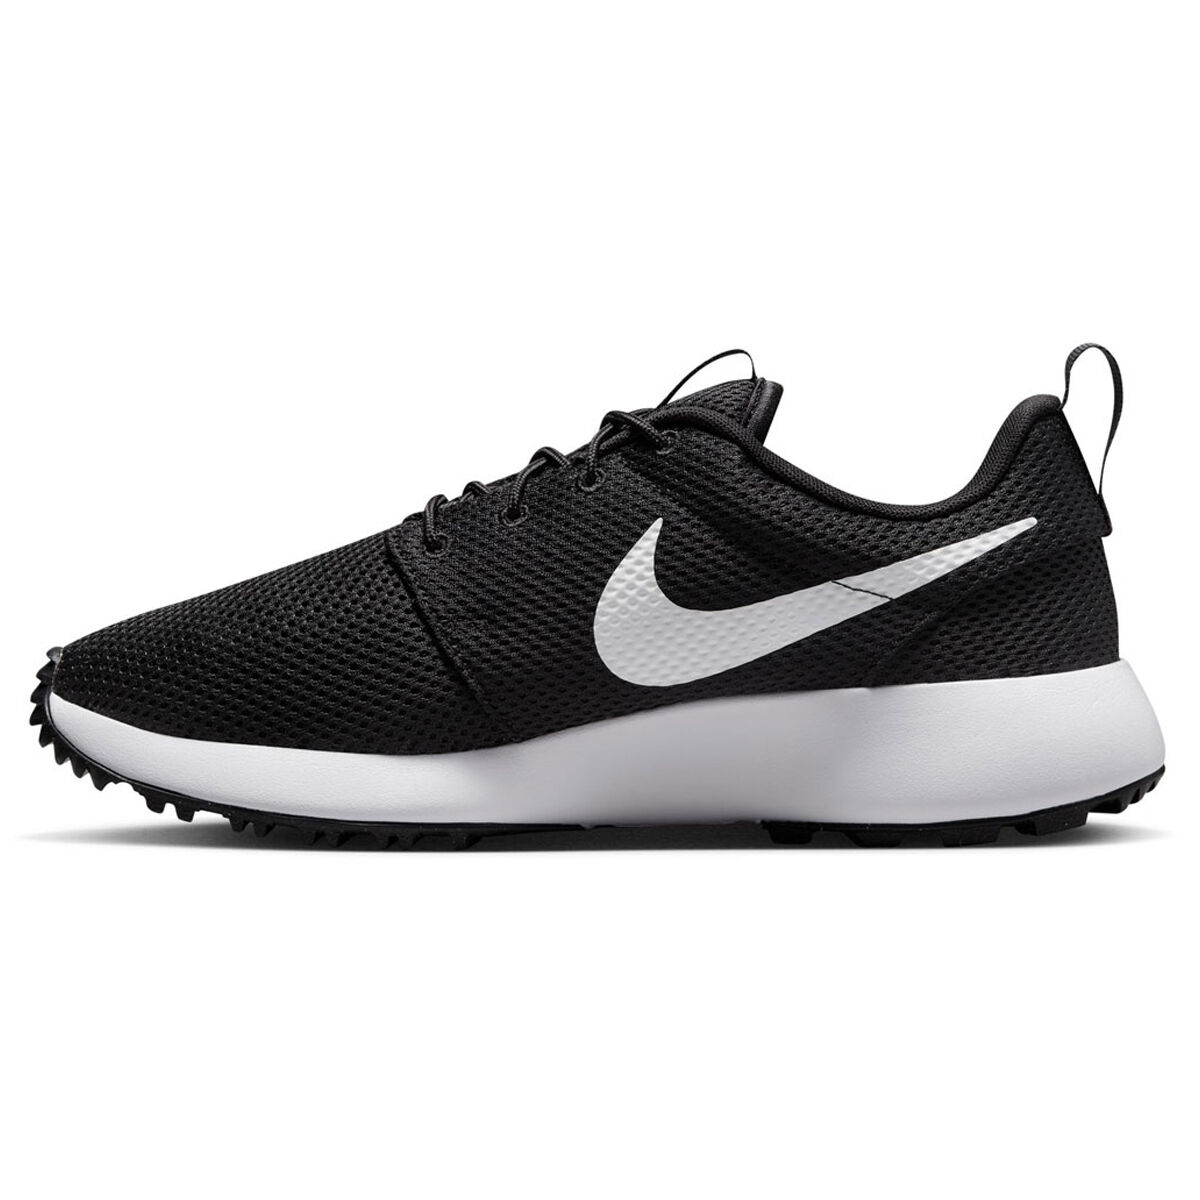 Golf Shoes | Nike, Under Armour & more | rebel